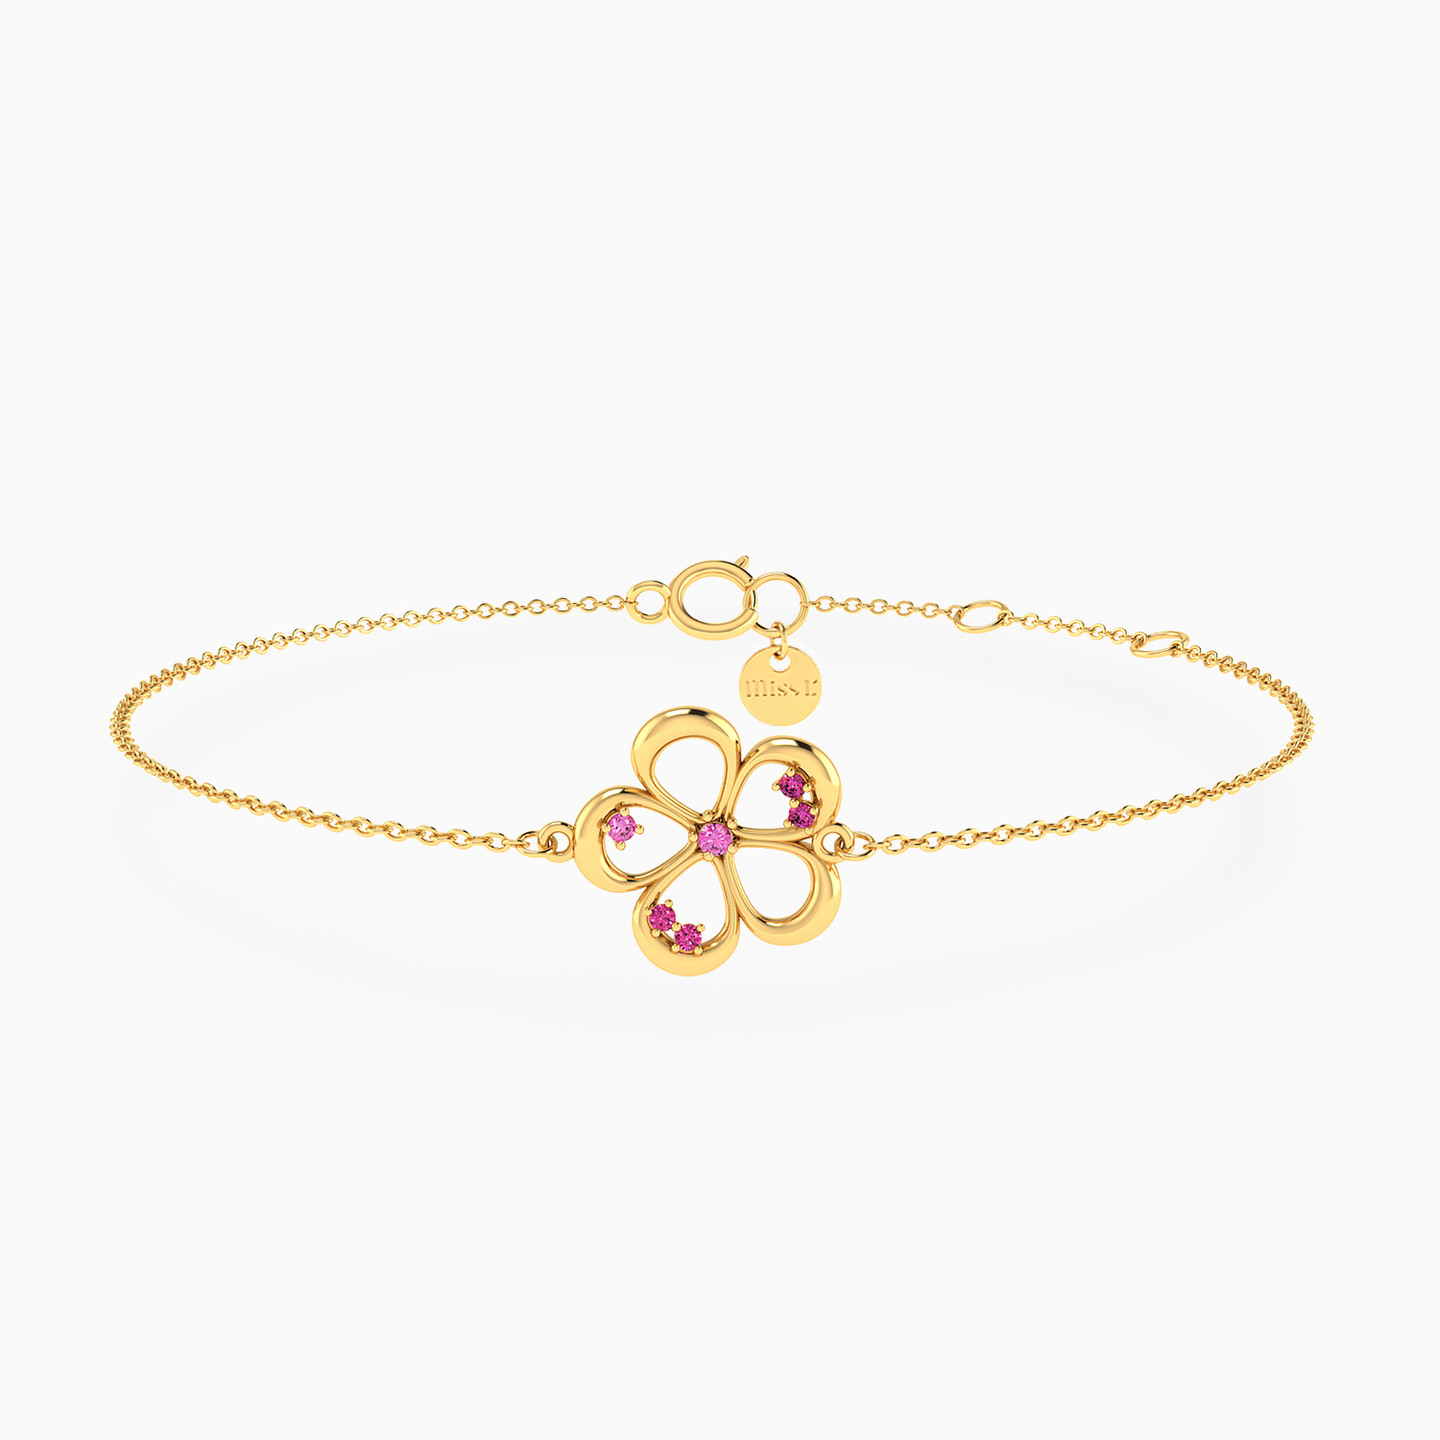 Flower Shaped Colored Stones Chain Bracelet in 18K Gold